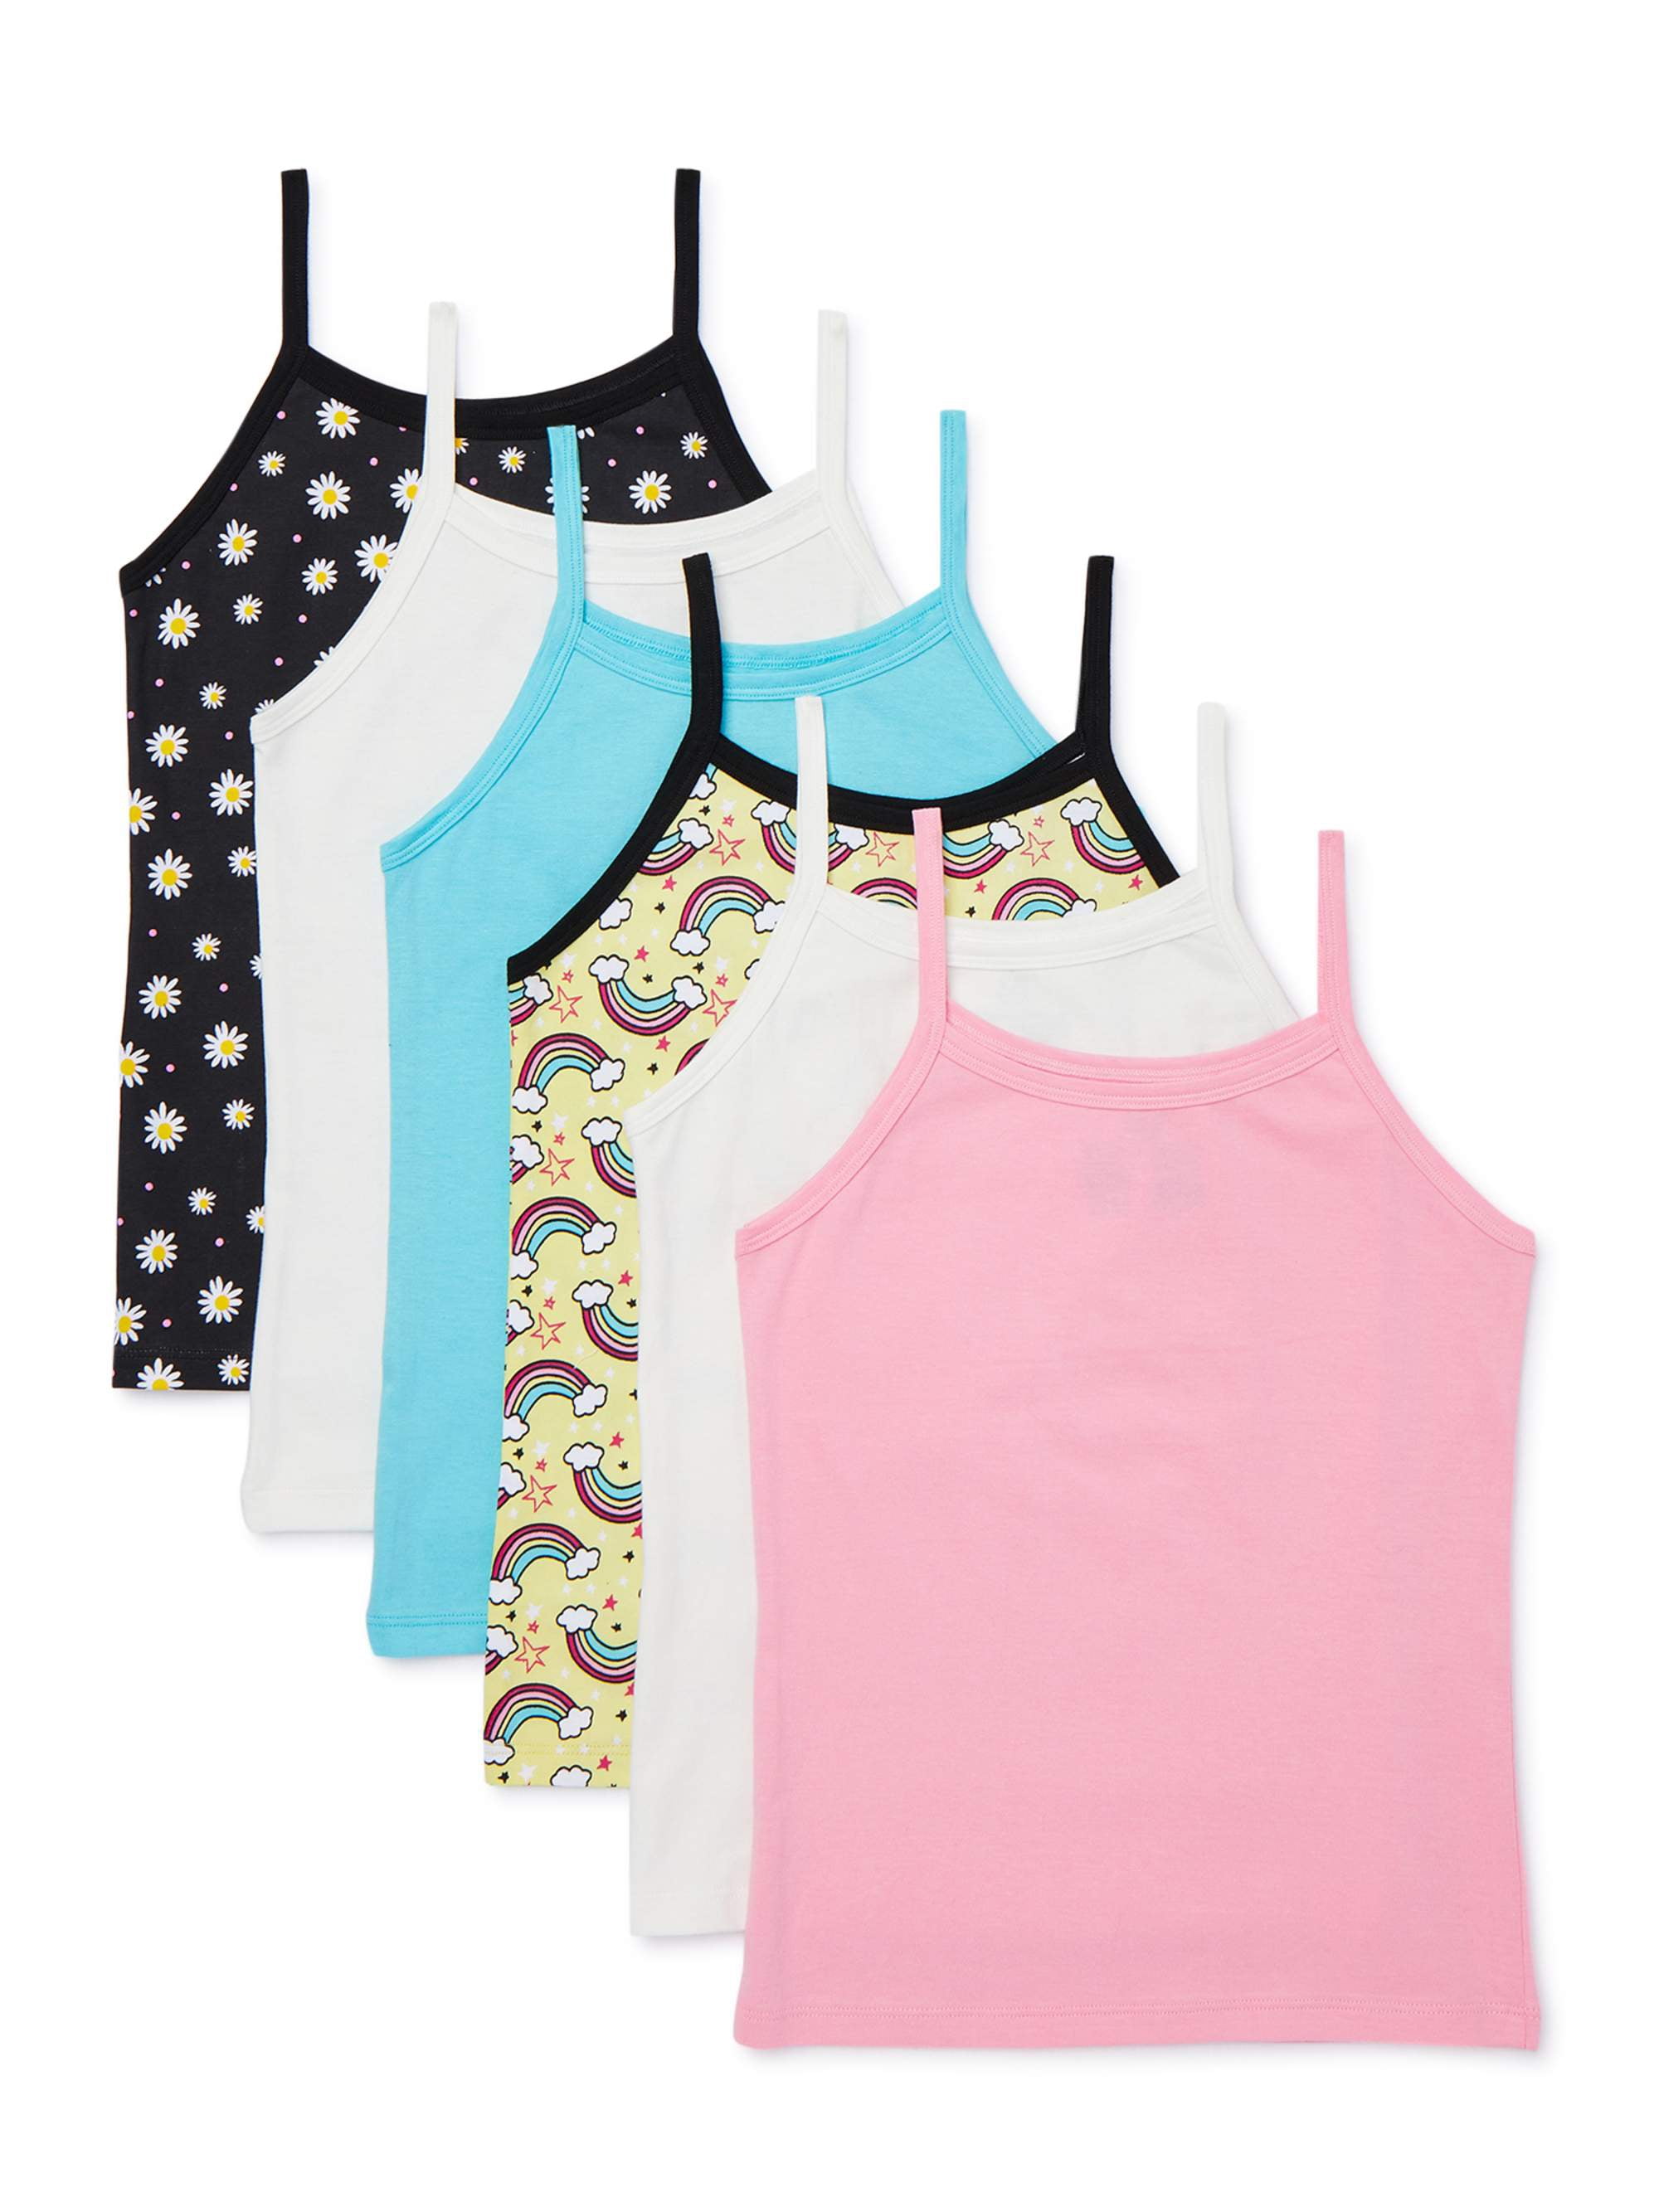  Pink Angel 6-Pack Girls' Undershirts, Tanks & Camisoles with  Adjustable Straps, White/Black, Size 4/5 : Clothing, Shoes & Jewelry